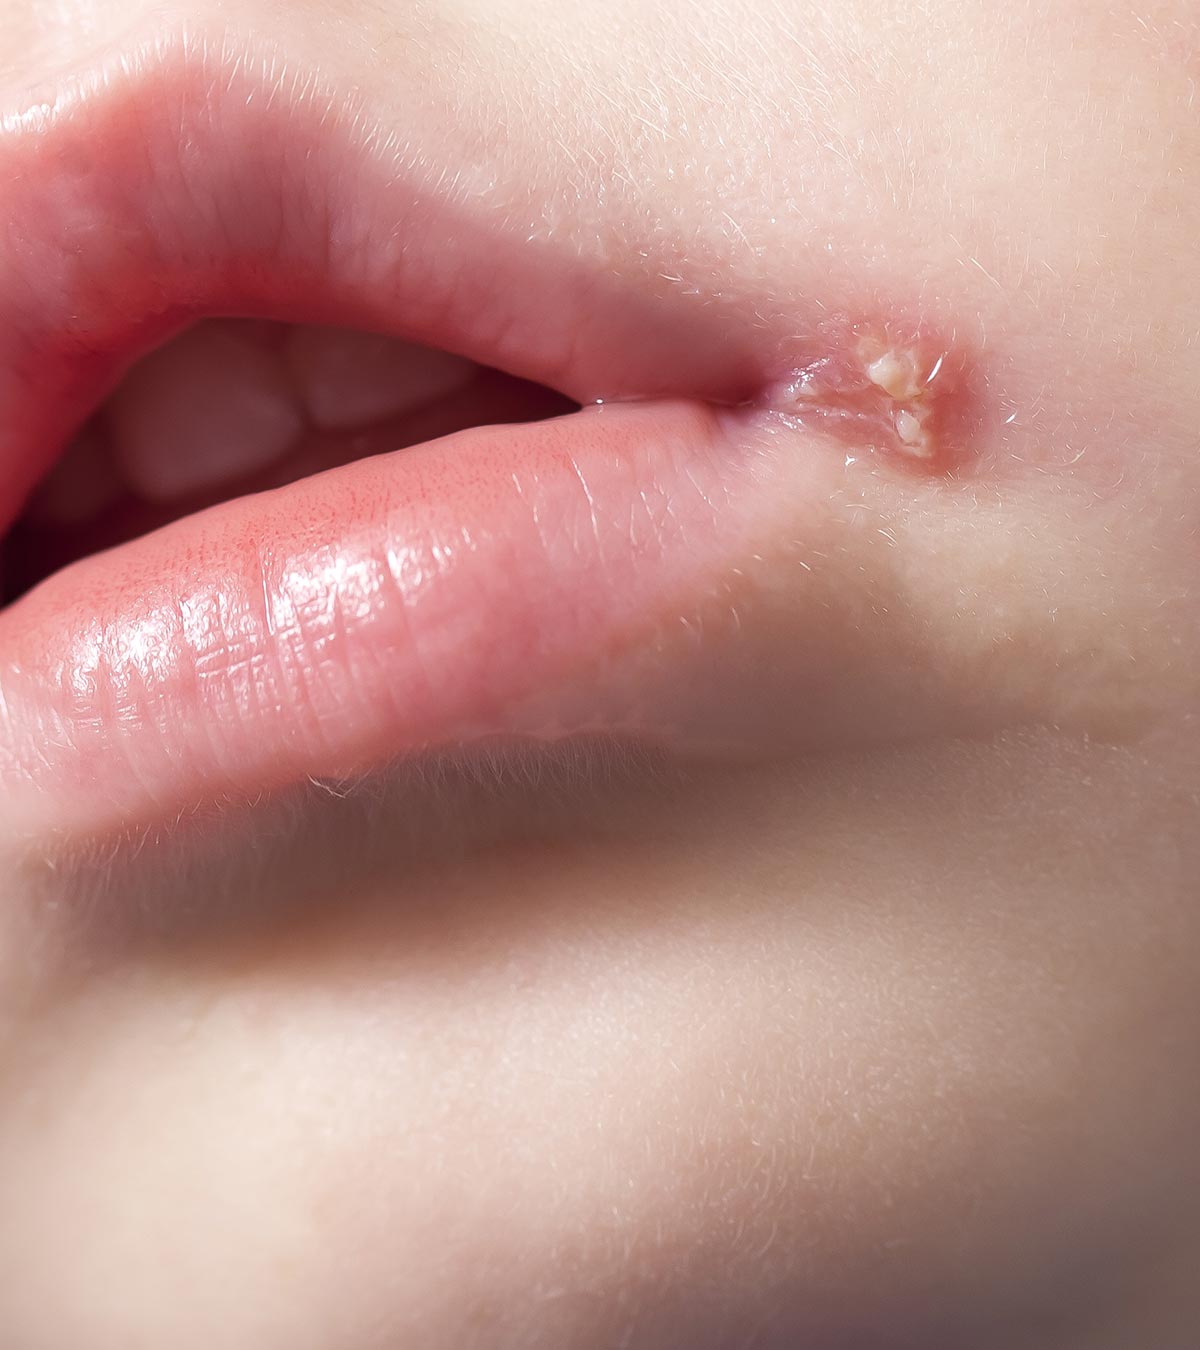 Baby With Cold Sores On Lips